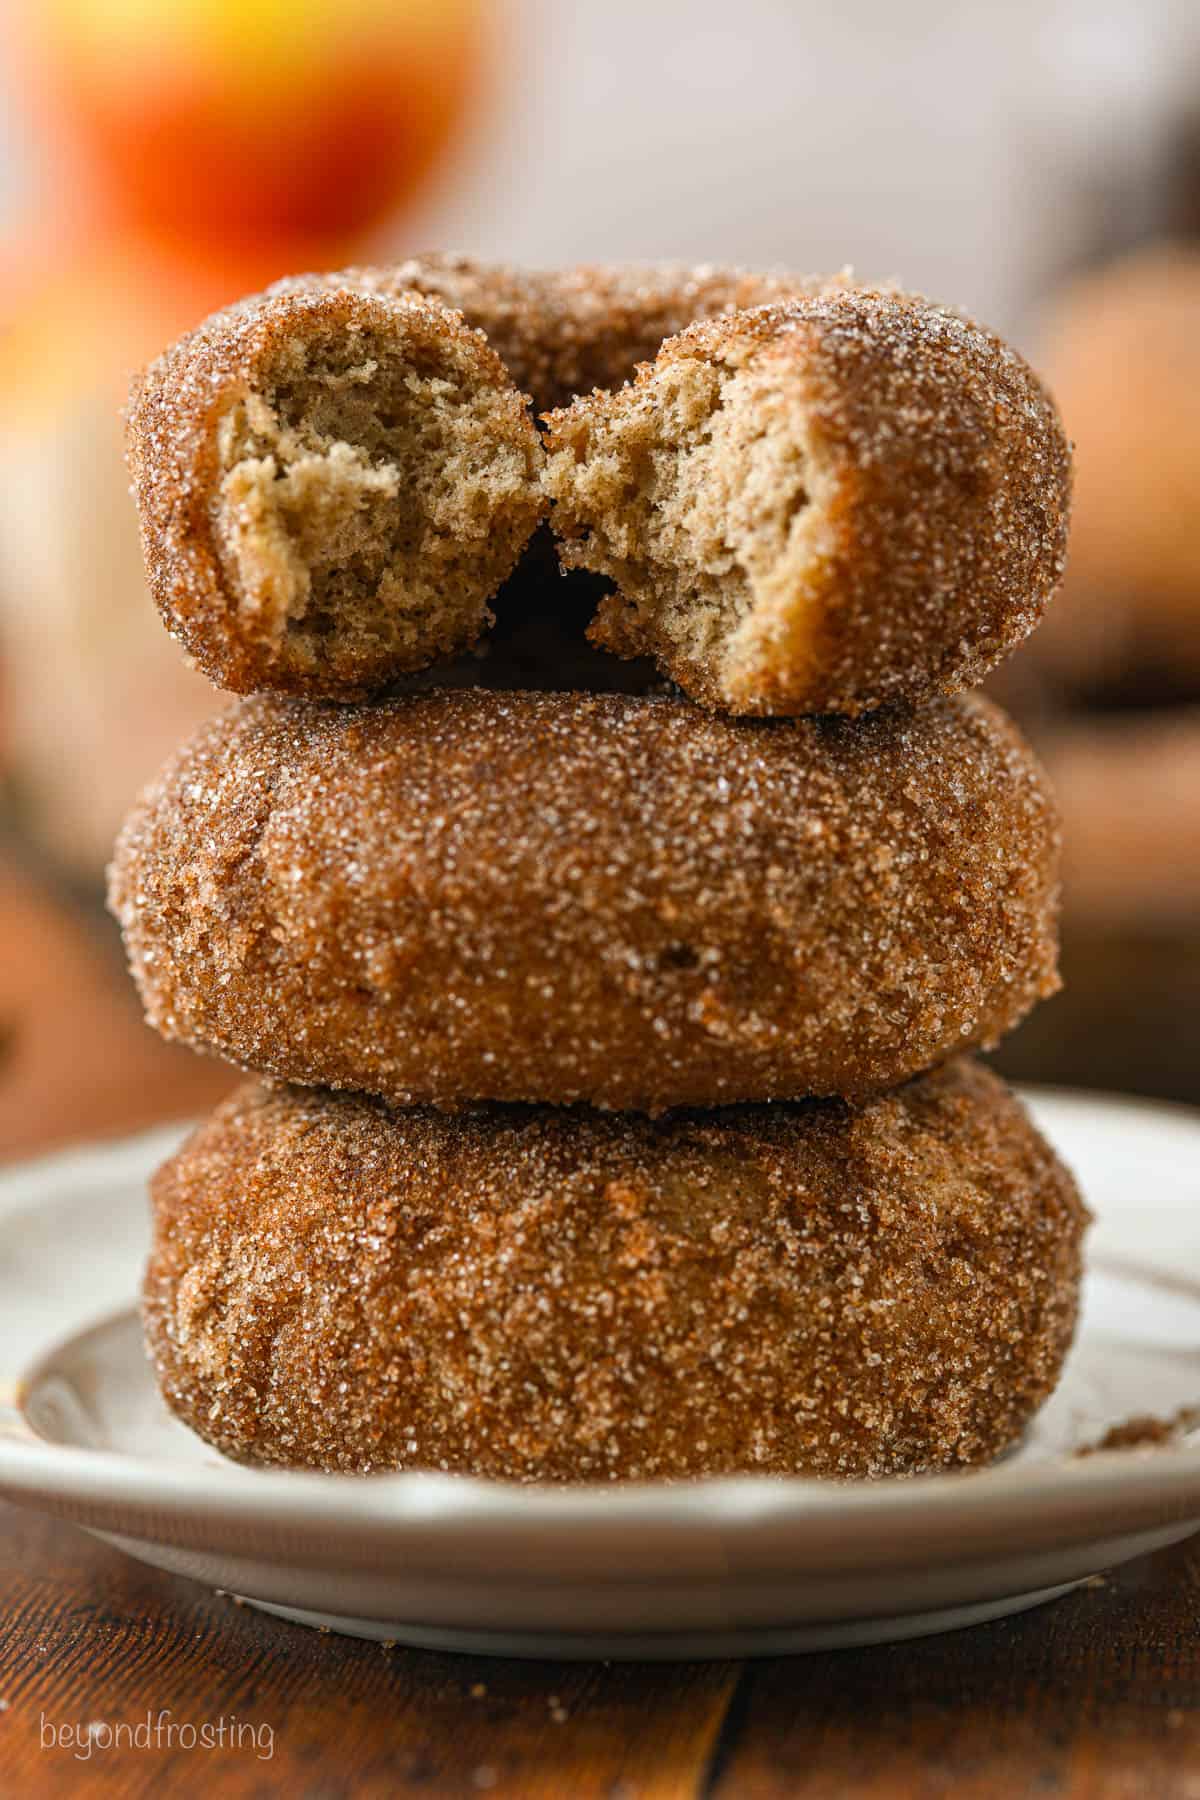 Three apple cider donuts stacked on top of one another on a white plate, with a bite missing from the top donut.